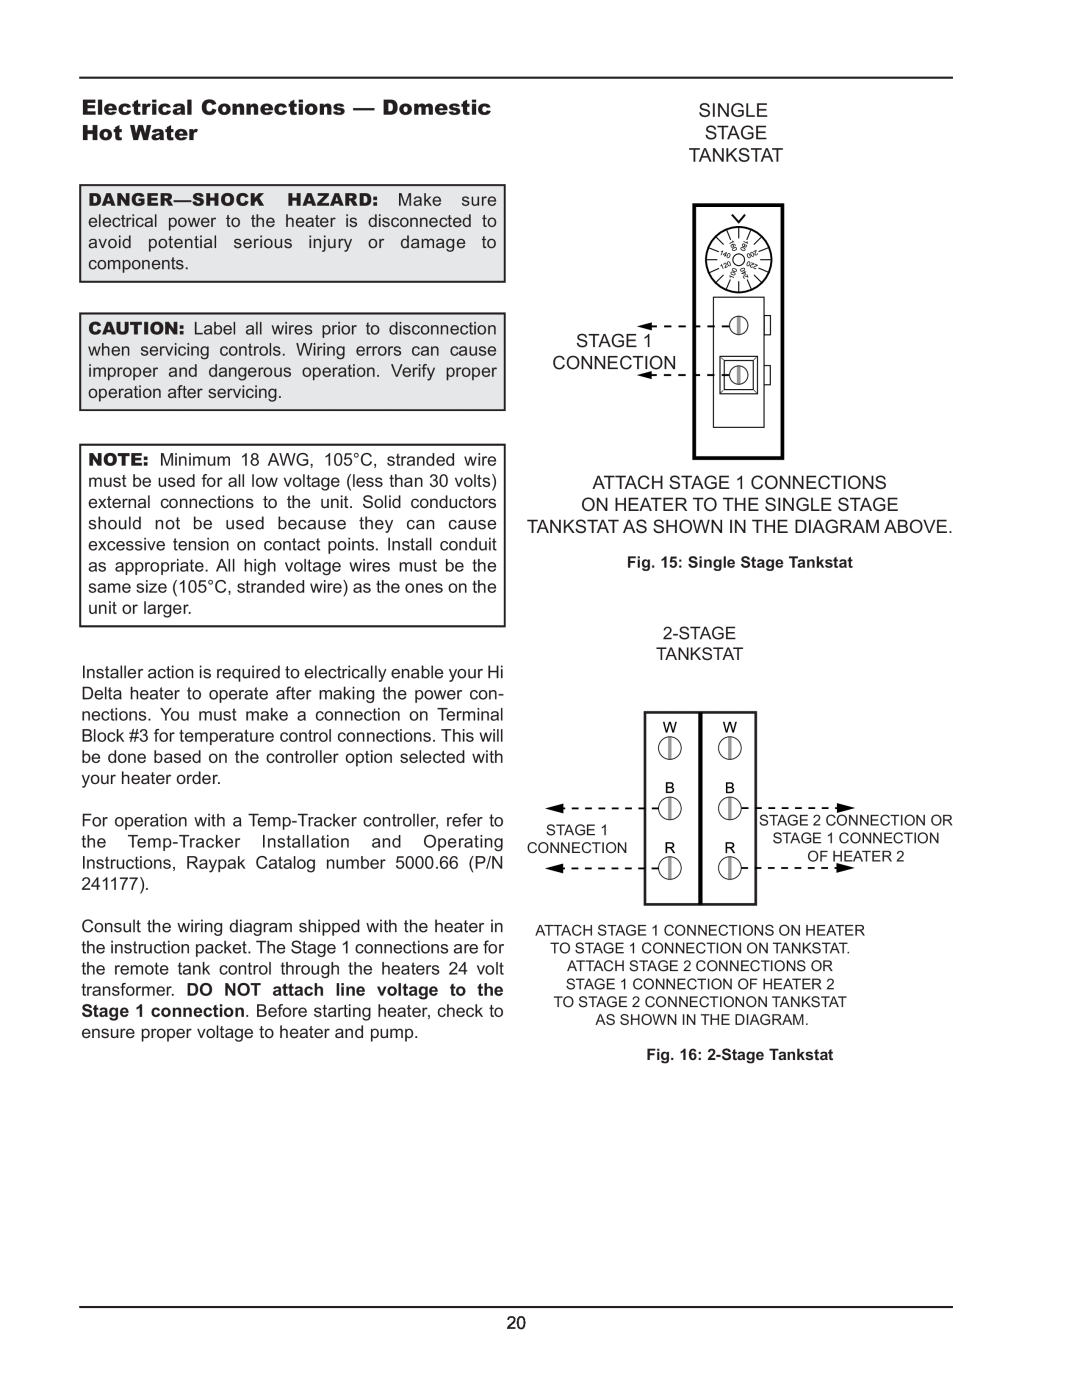 Raypak HD401, HD101 manual Electrical Connections - Domestic Hot Water, Single Stage Tankstat Stage Connection 